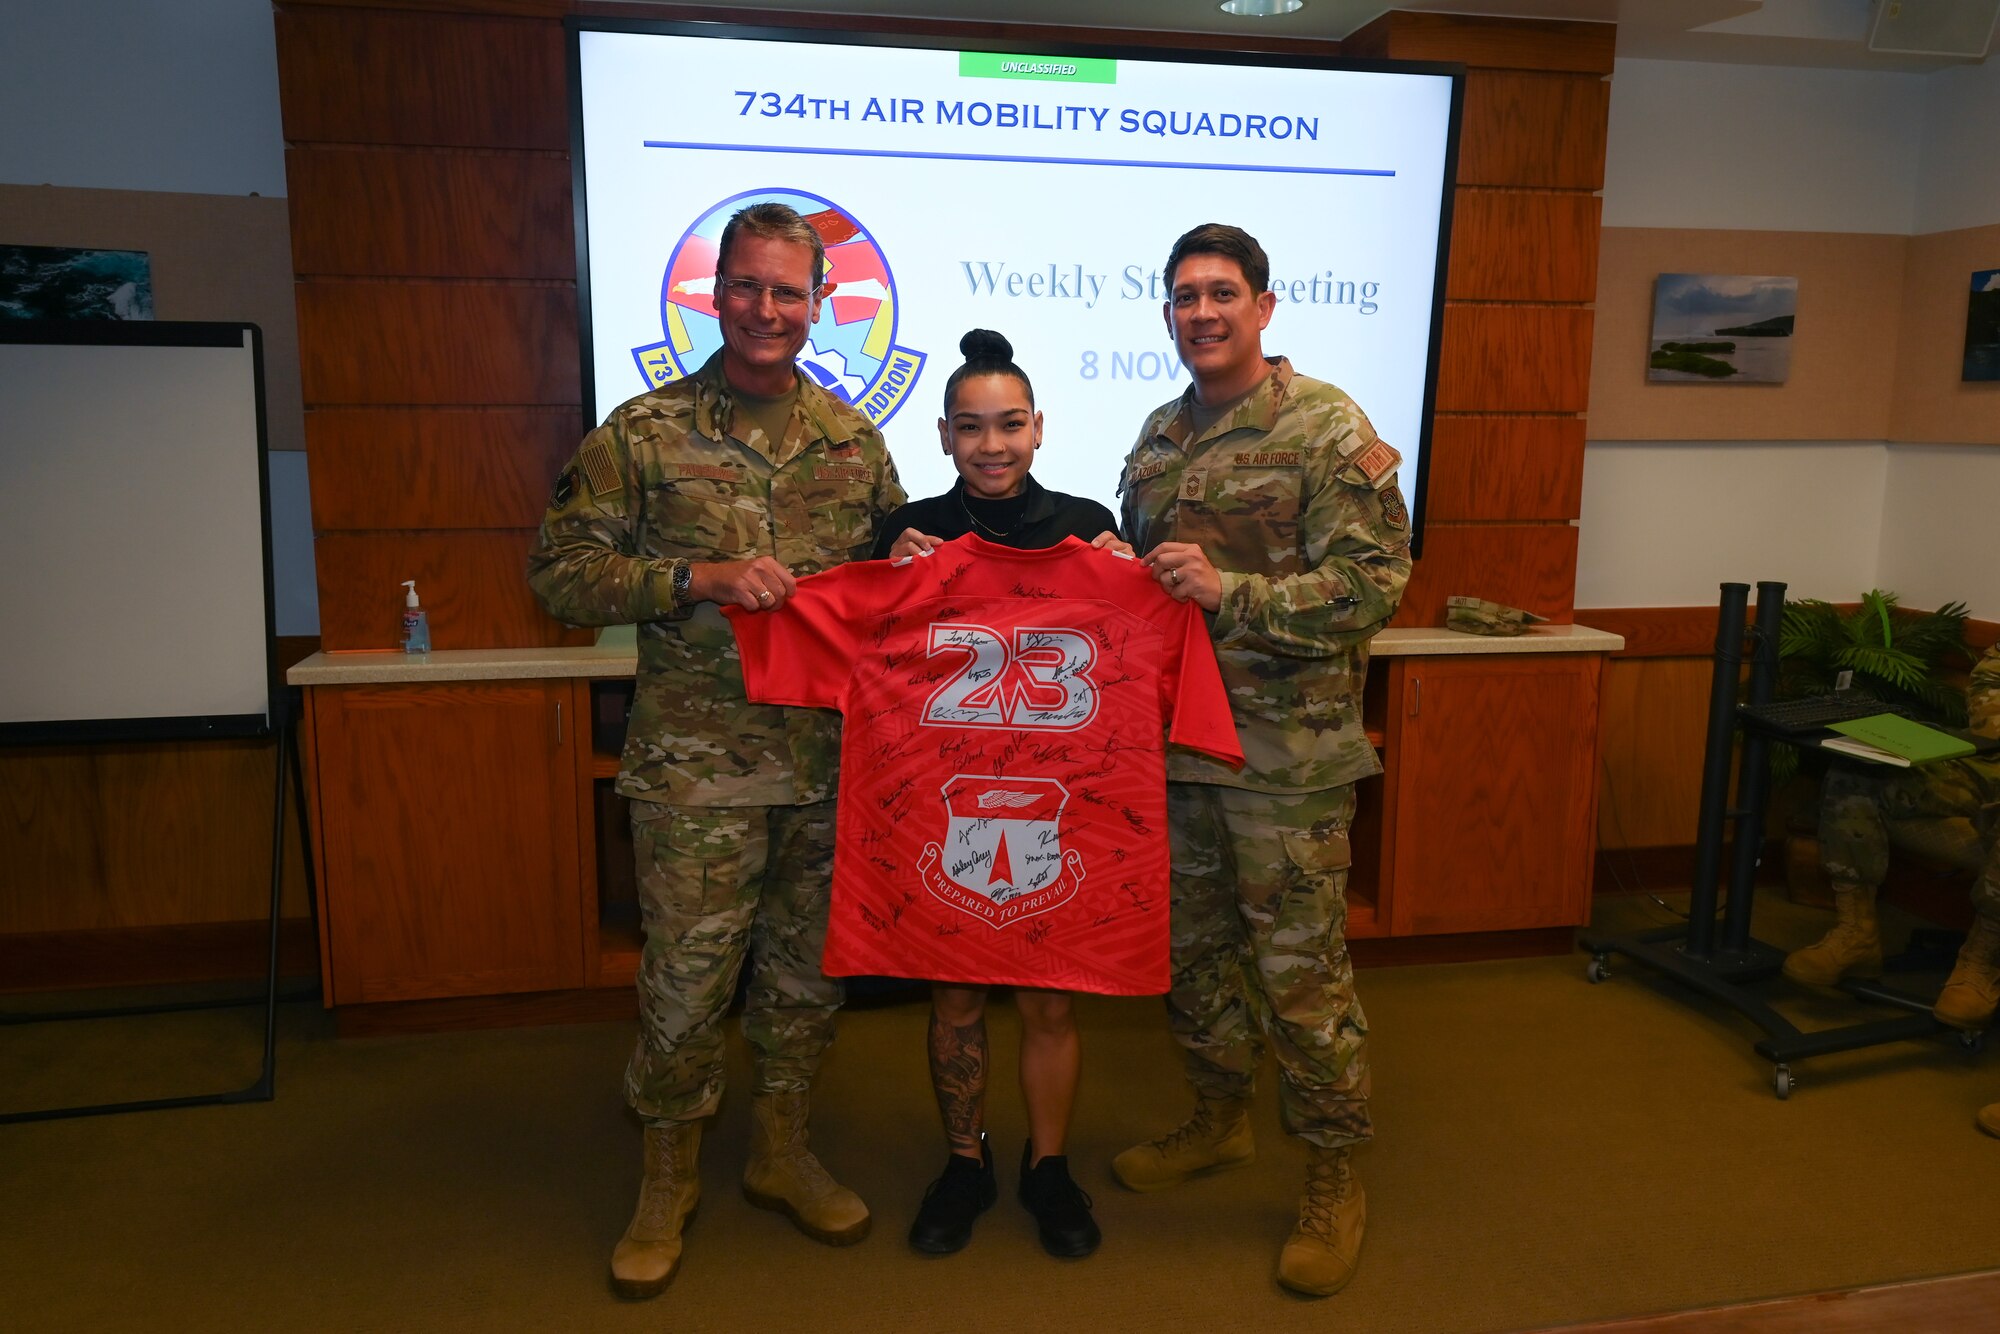 A government worker took a picture with two Airmen while holding a jersey.